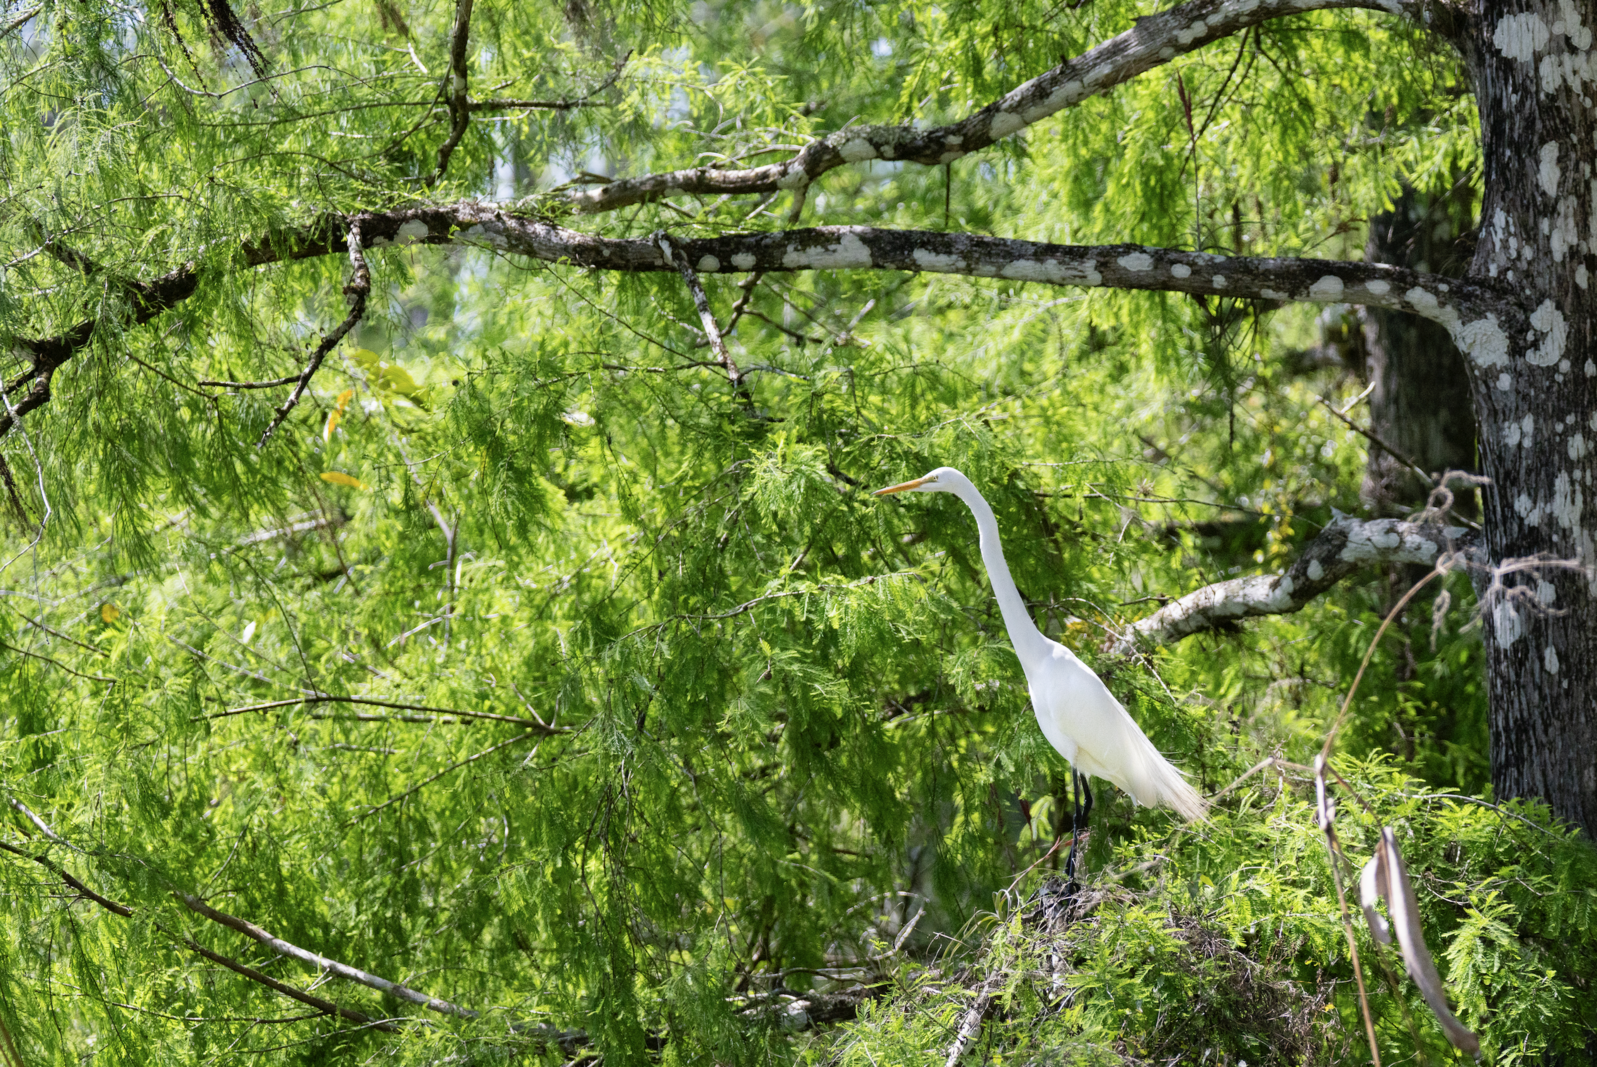 Great Egret standing in a bald cypress tree